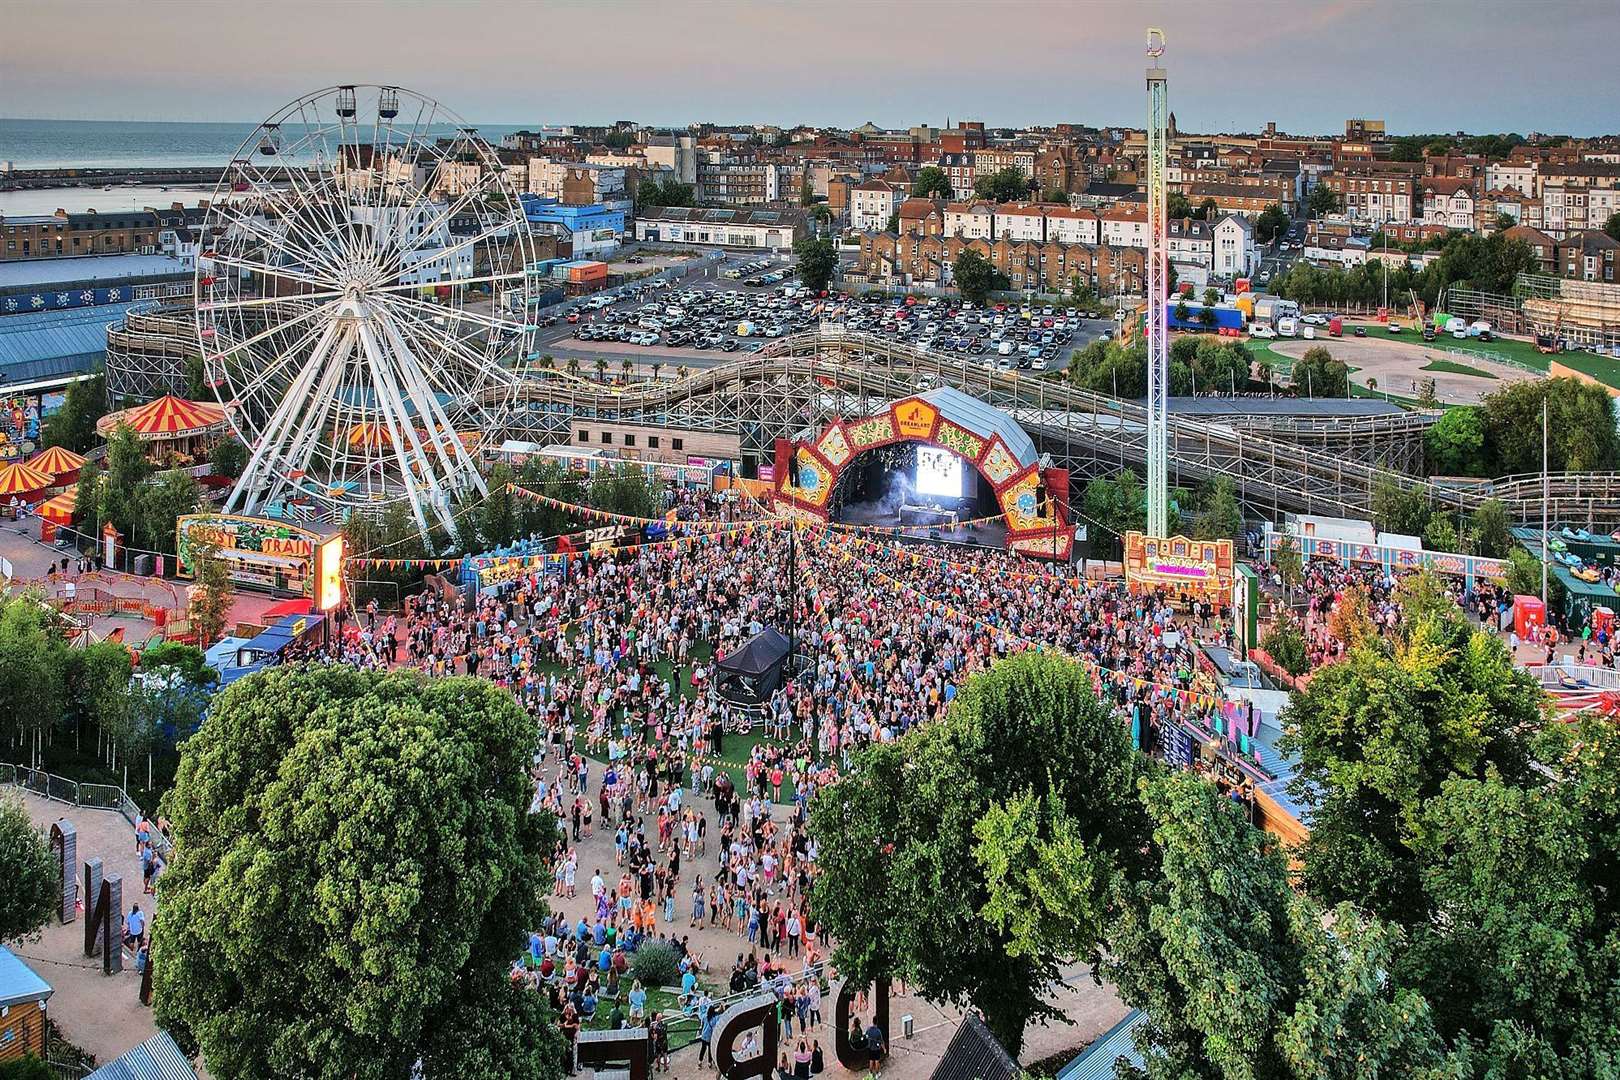 The Margate music venue won a licencing bid for 40 events earlier this year. Picture: Dreamland